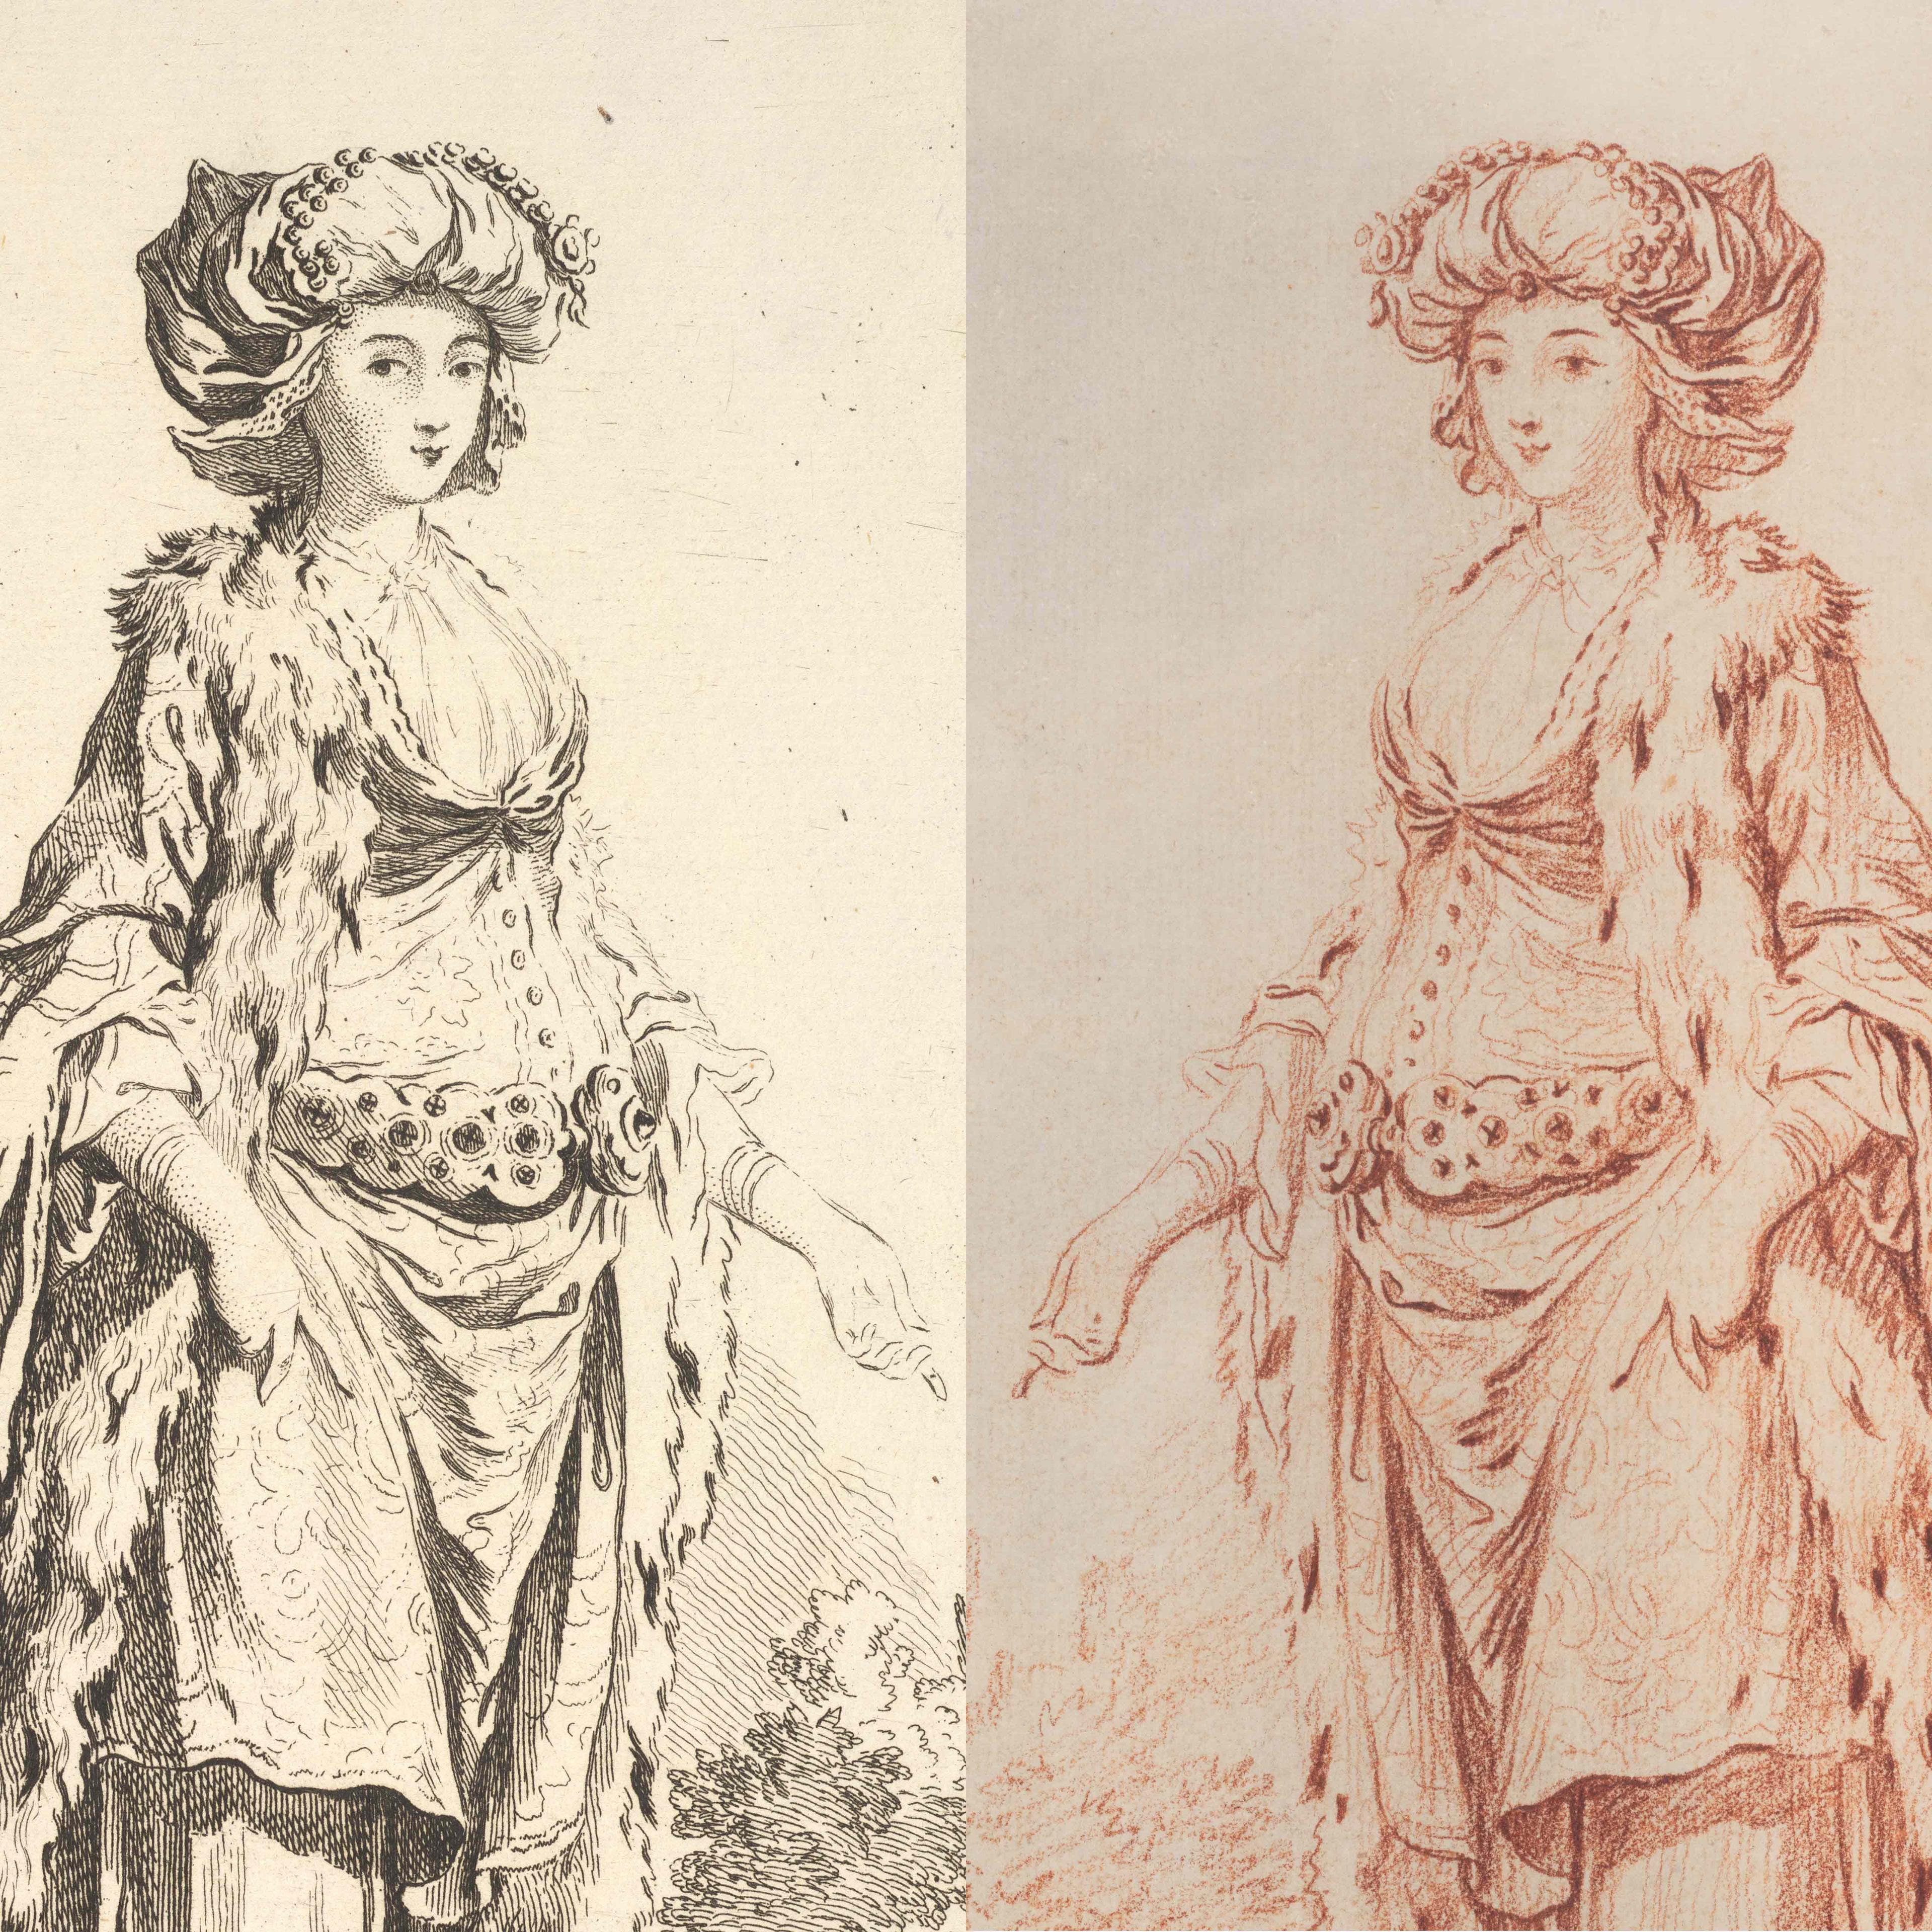 Composite image of two identical drawings of a woman with a large hat and her hands holding her billowing dress